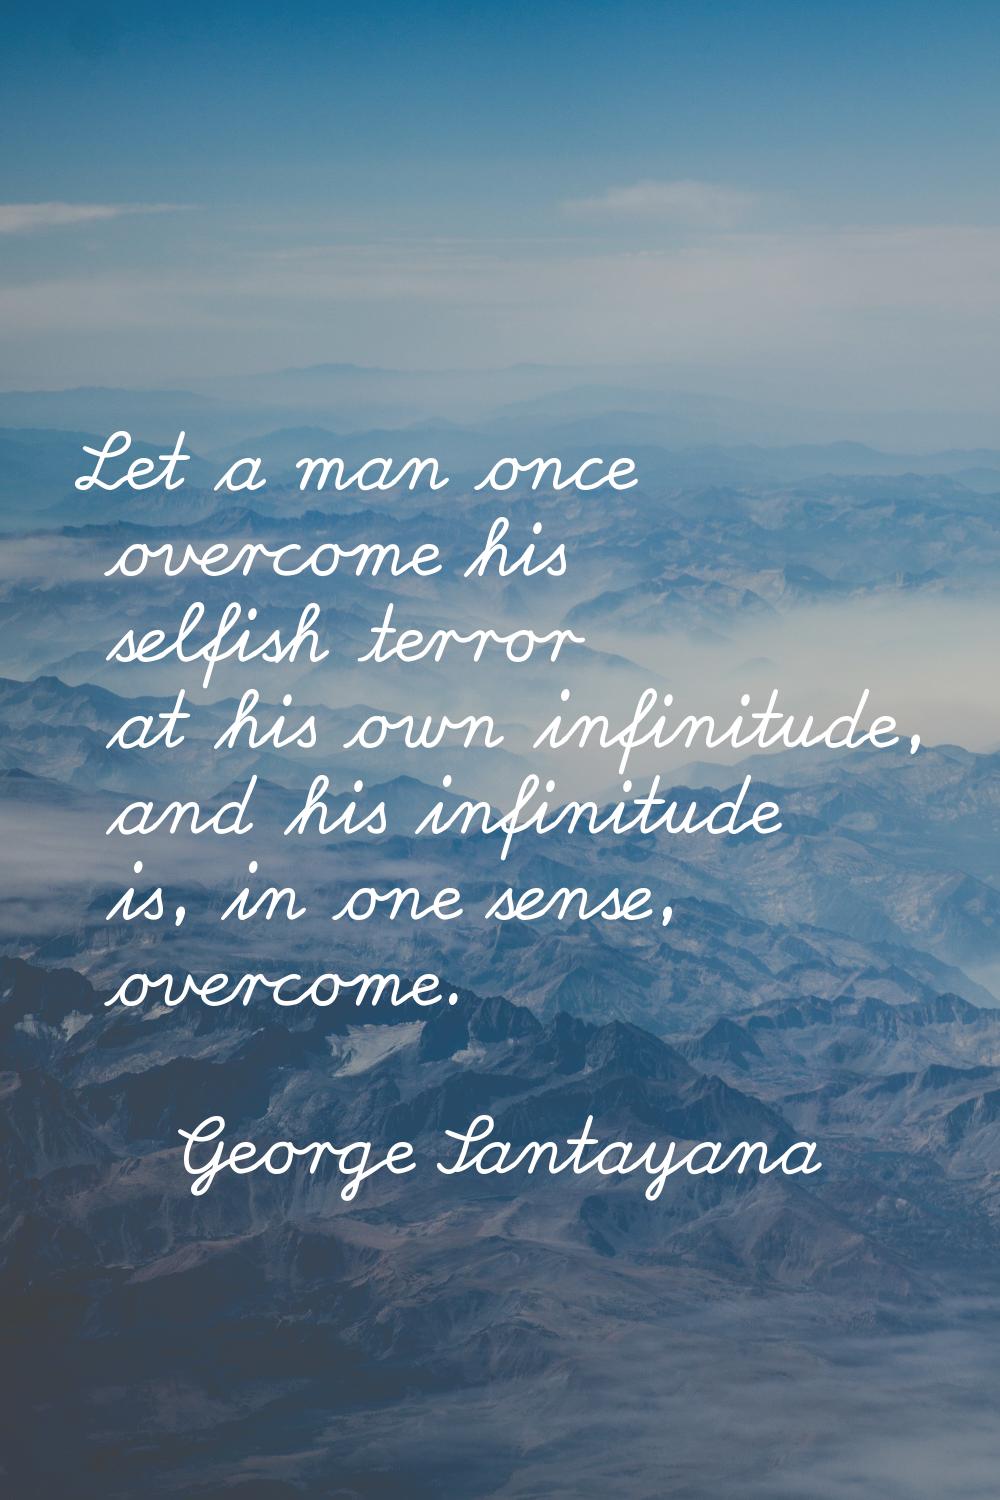 Let a man once overcome his selfish terror at his own infinitude, and his infinitude is, in one sen